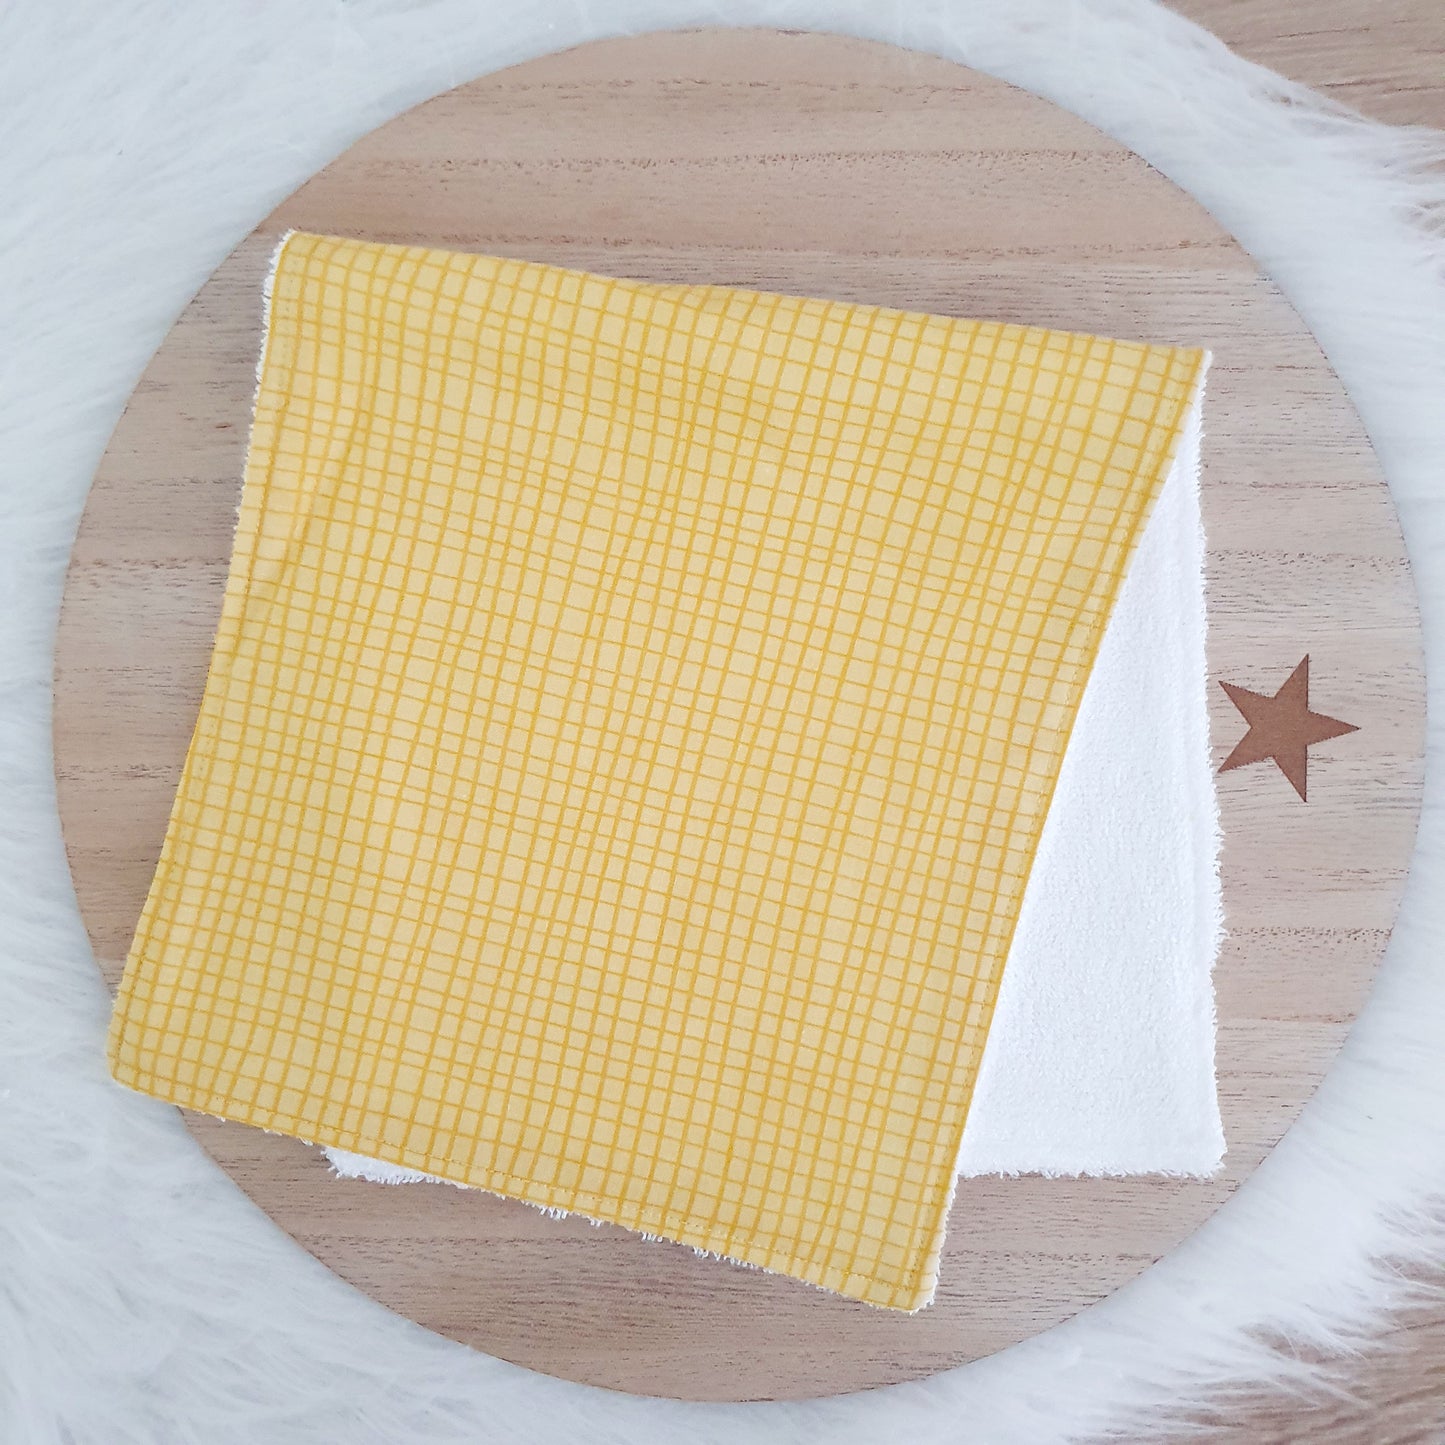 Burp Cloth | Baby Burp Cloths | Baby Shower Gift | Bamboo Backed Ultra Absorbent Towelling - YELLOW WEAVE